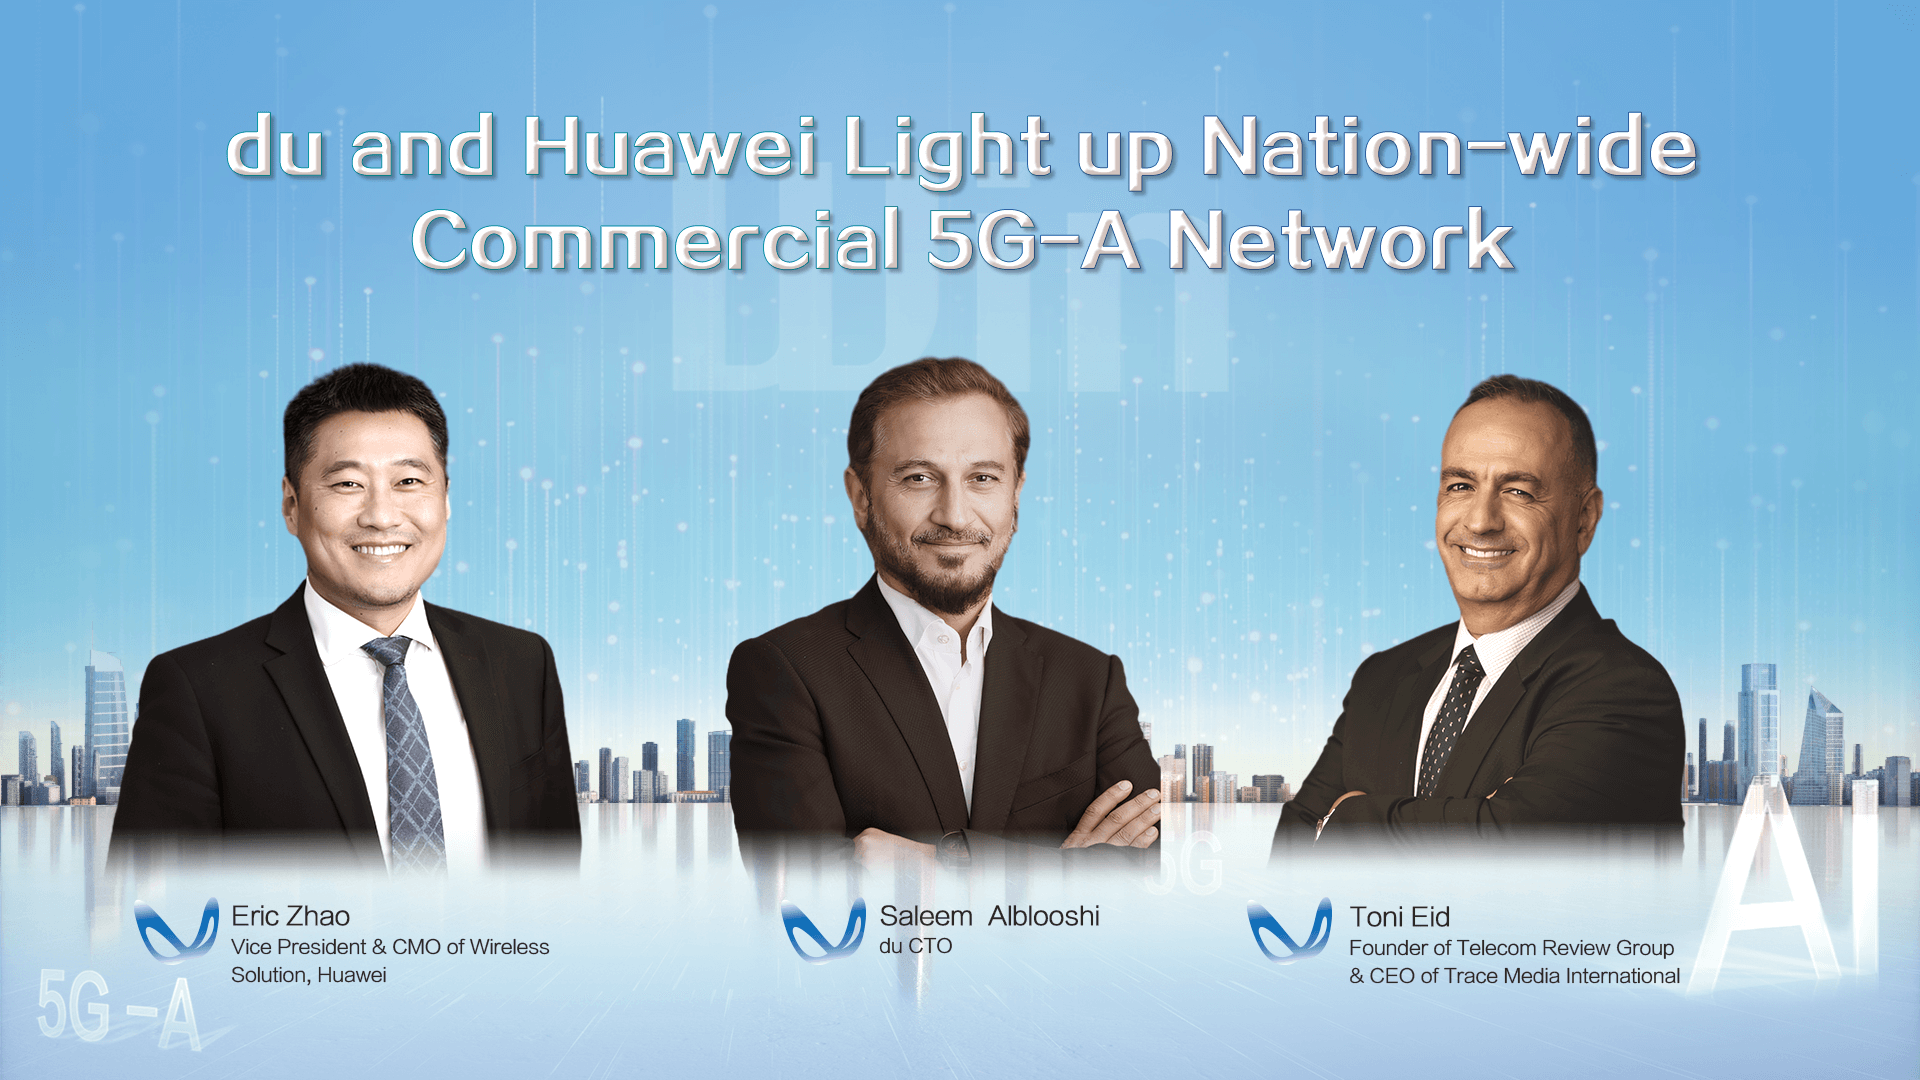 du and Huawei Light up Nation-wide Commercial 5G-A Network